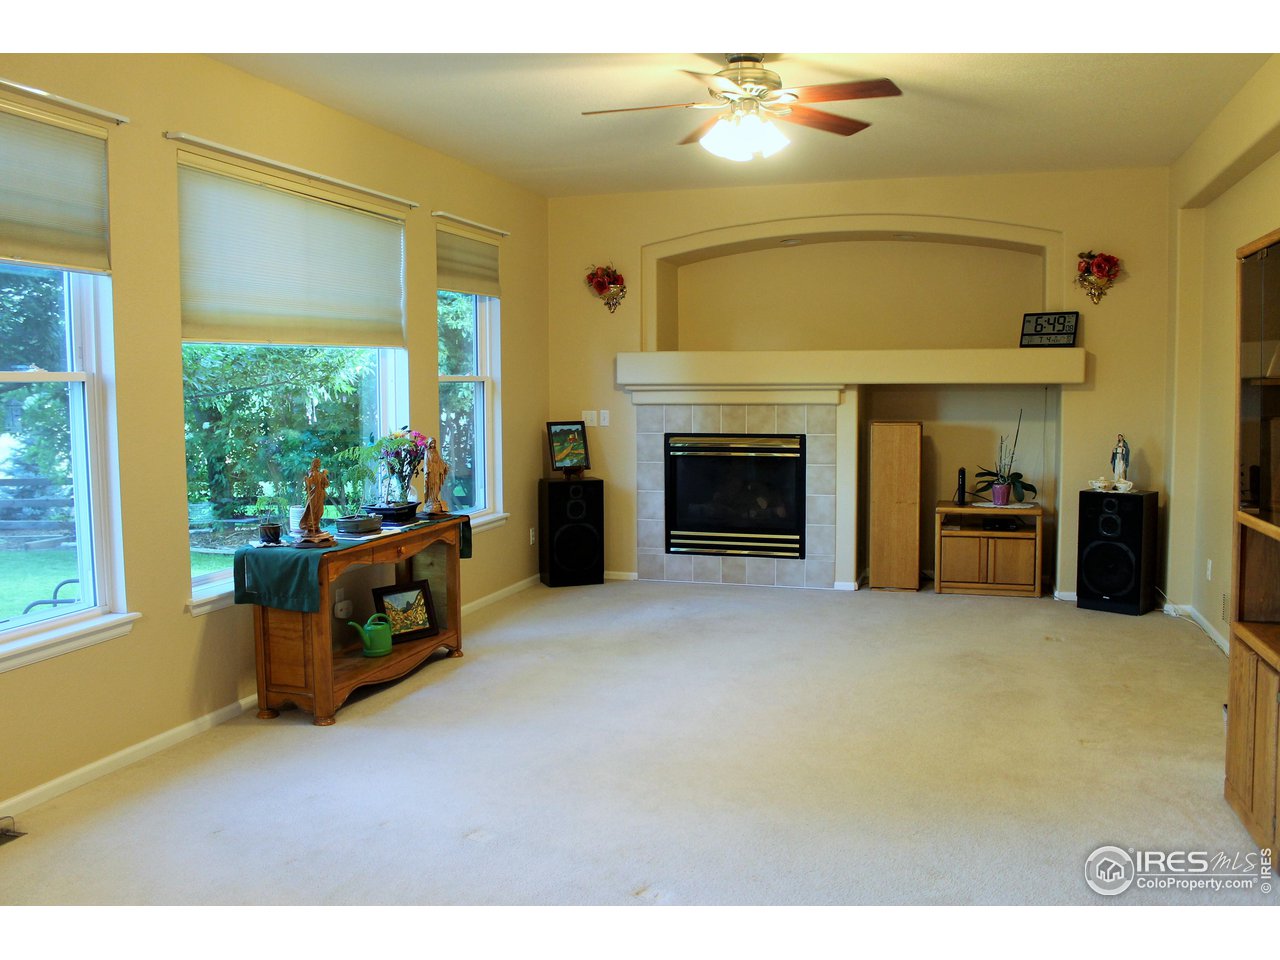 Big family room adjacent to spacious kitchen / breakfast nook.